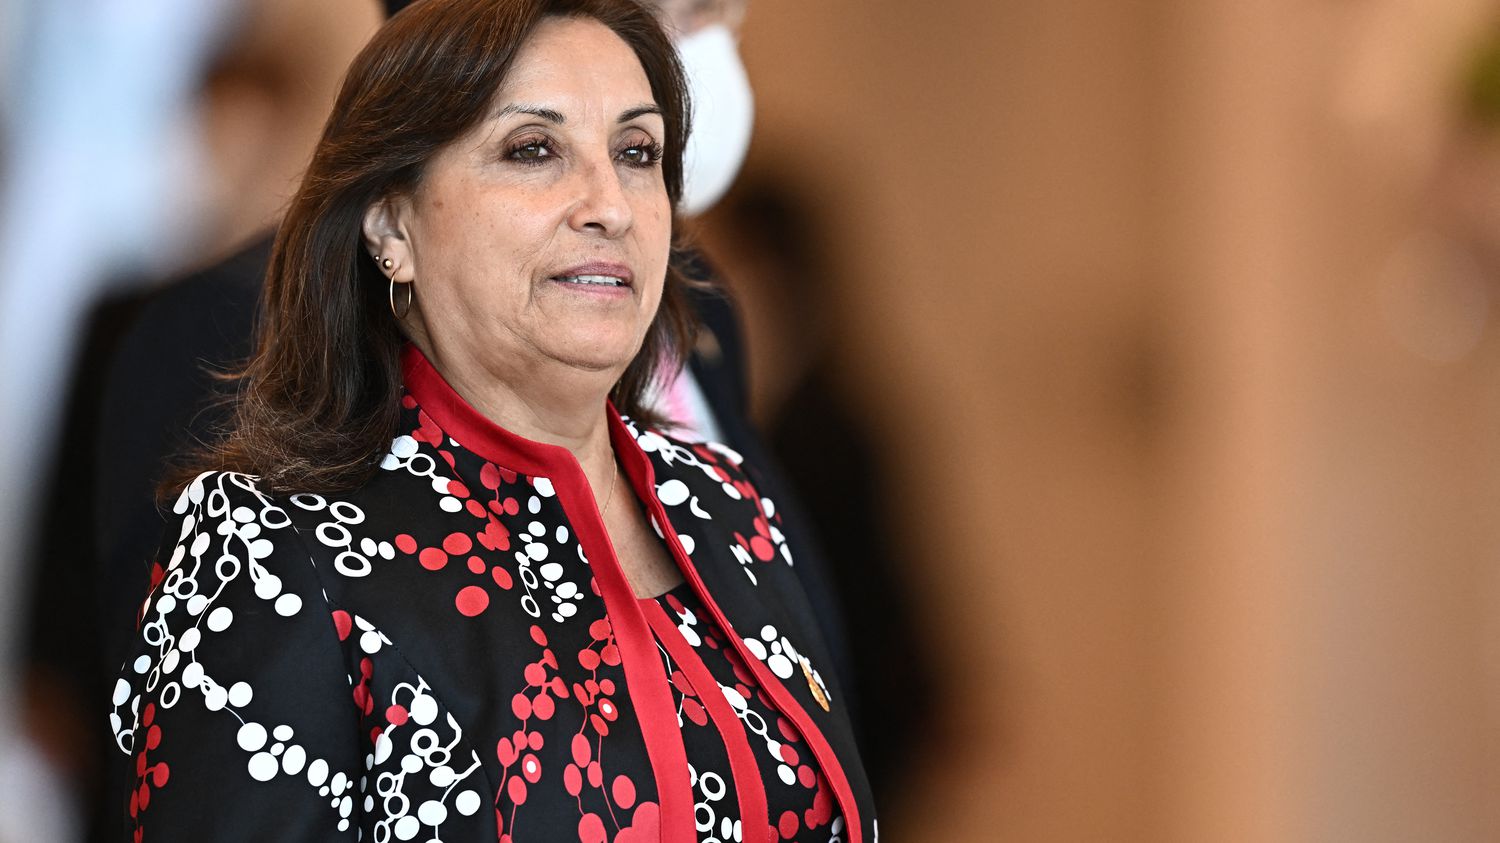 Peru: Vice-President Dina Boluarte sworn in as head of the country after the dismissal of Pedro Castillo by Parliament
